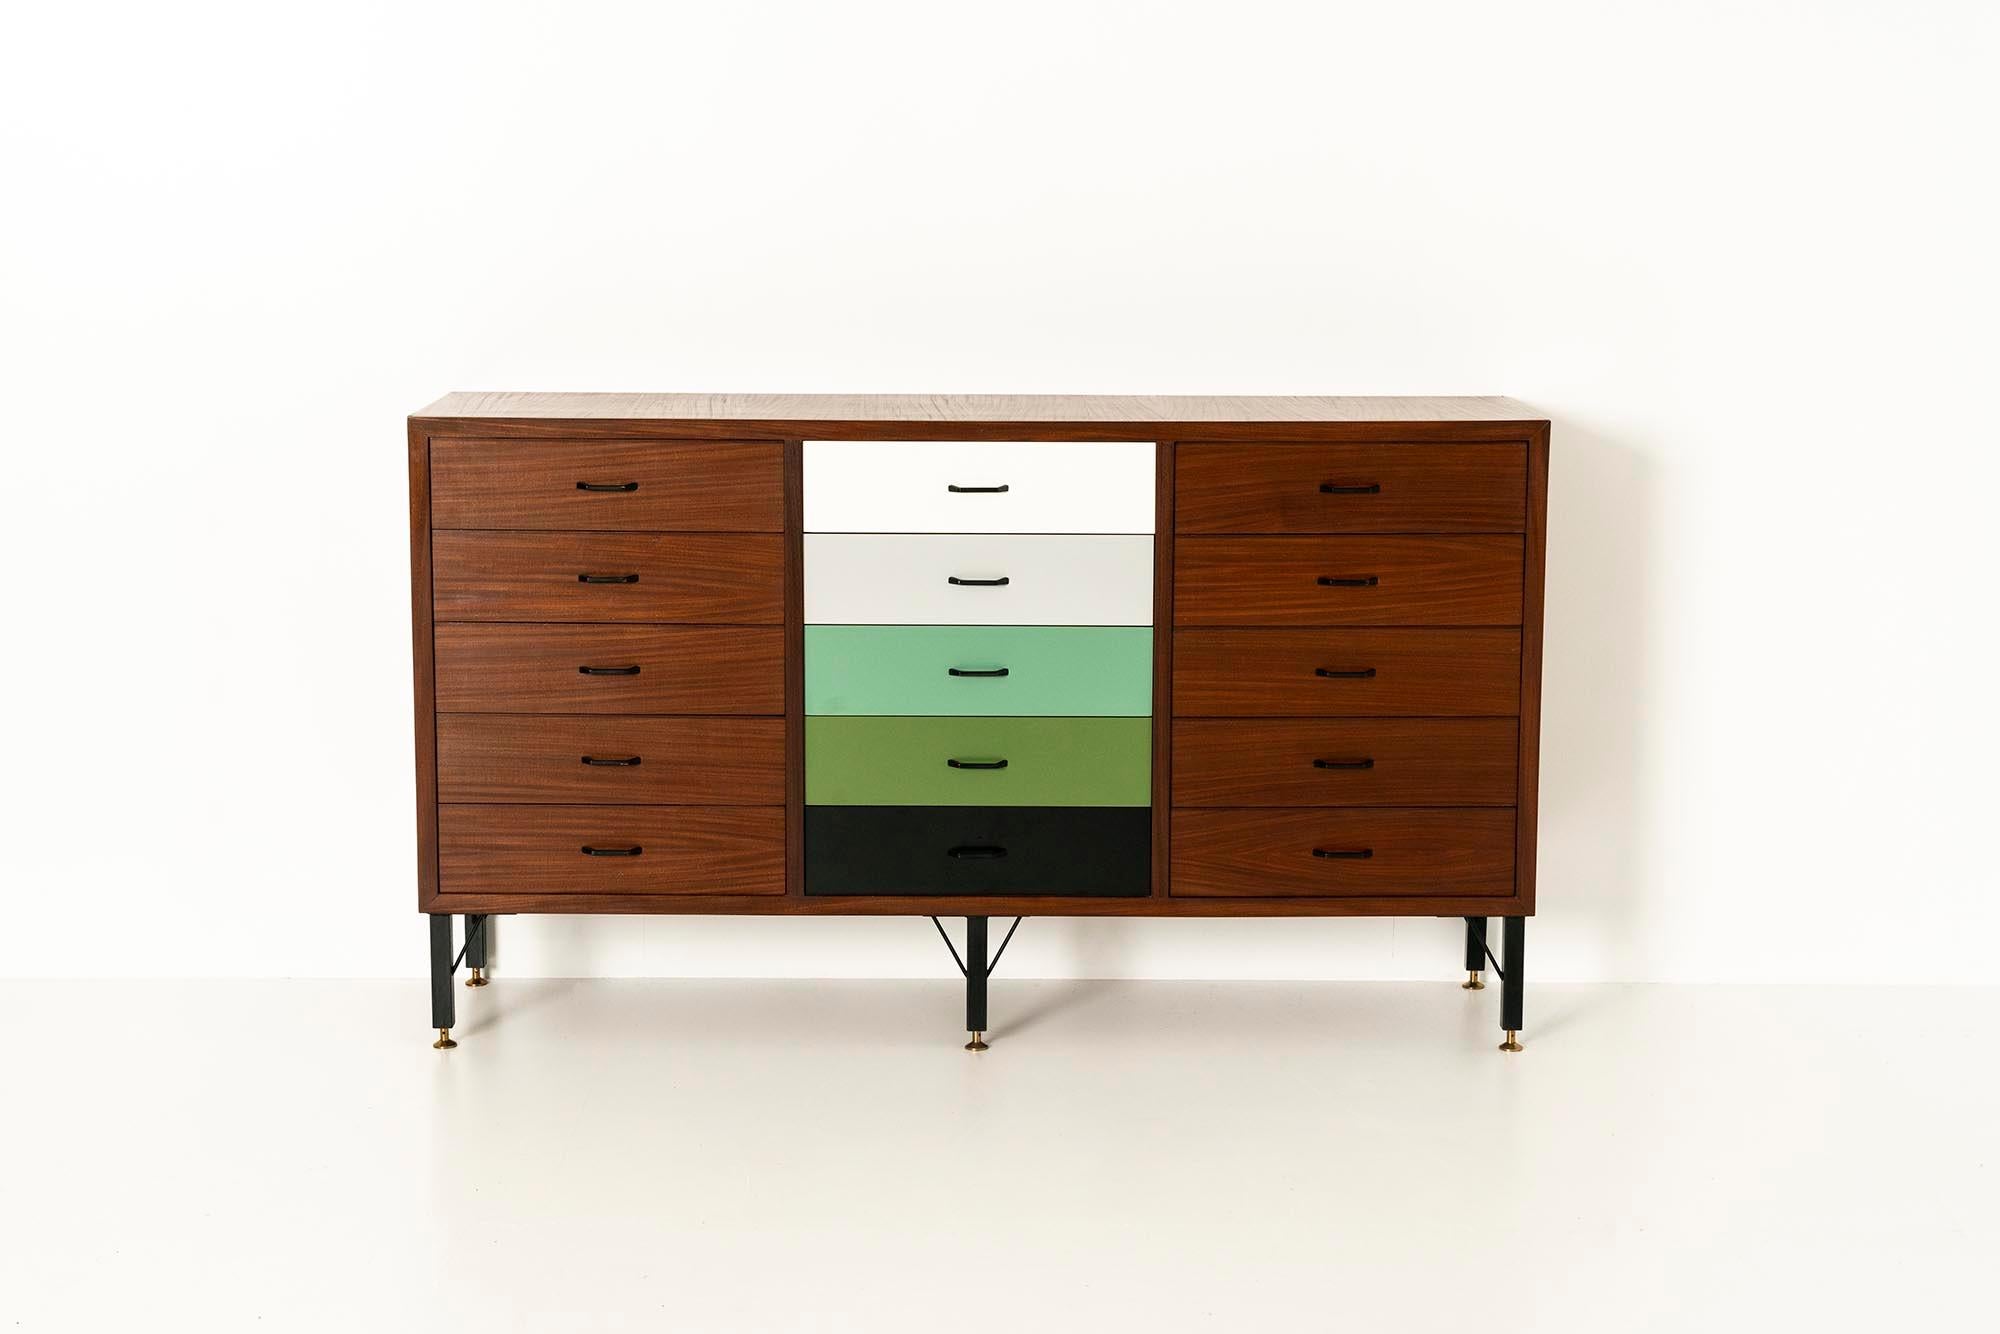 A playful Italian sideboard with a teak veneer finish supported by a rather architectonic metal frame reminiscent of a main supporting structure of a building. The feet are finished in brass and allow for a daring contrast with regard to the tightly